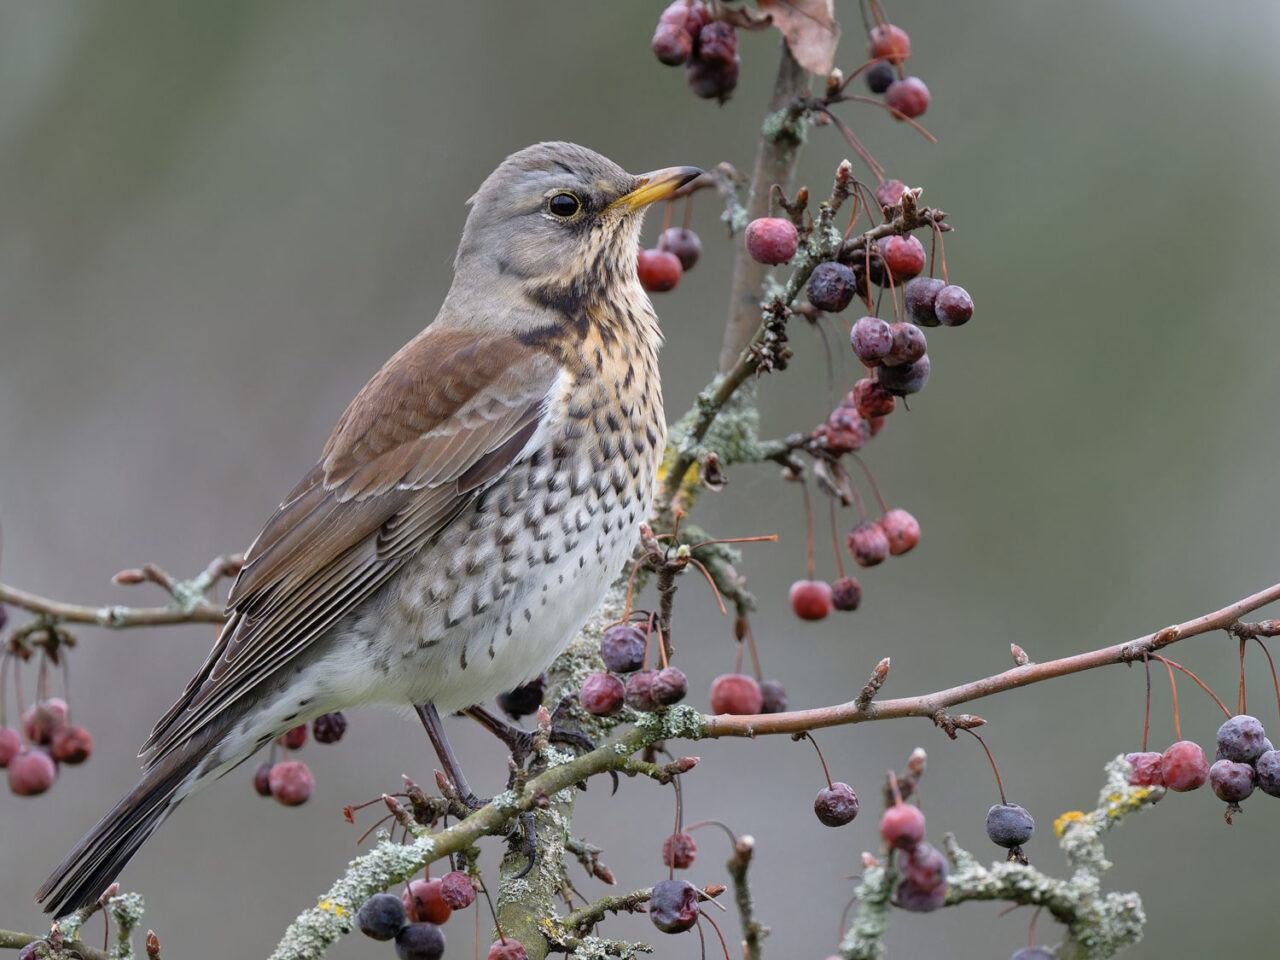 A gray and brown thrush with a spotted breast perches in a berry bush.